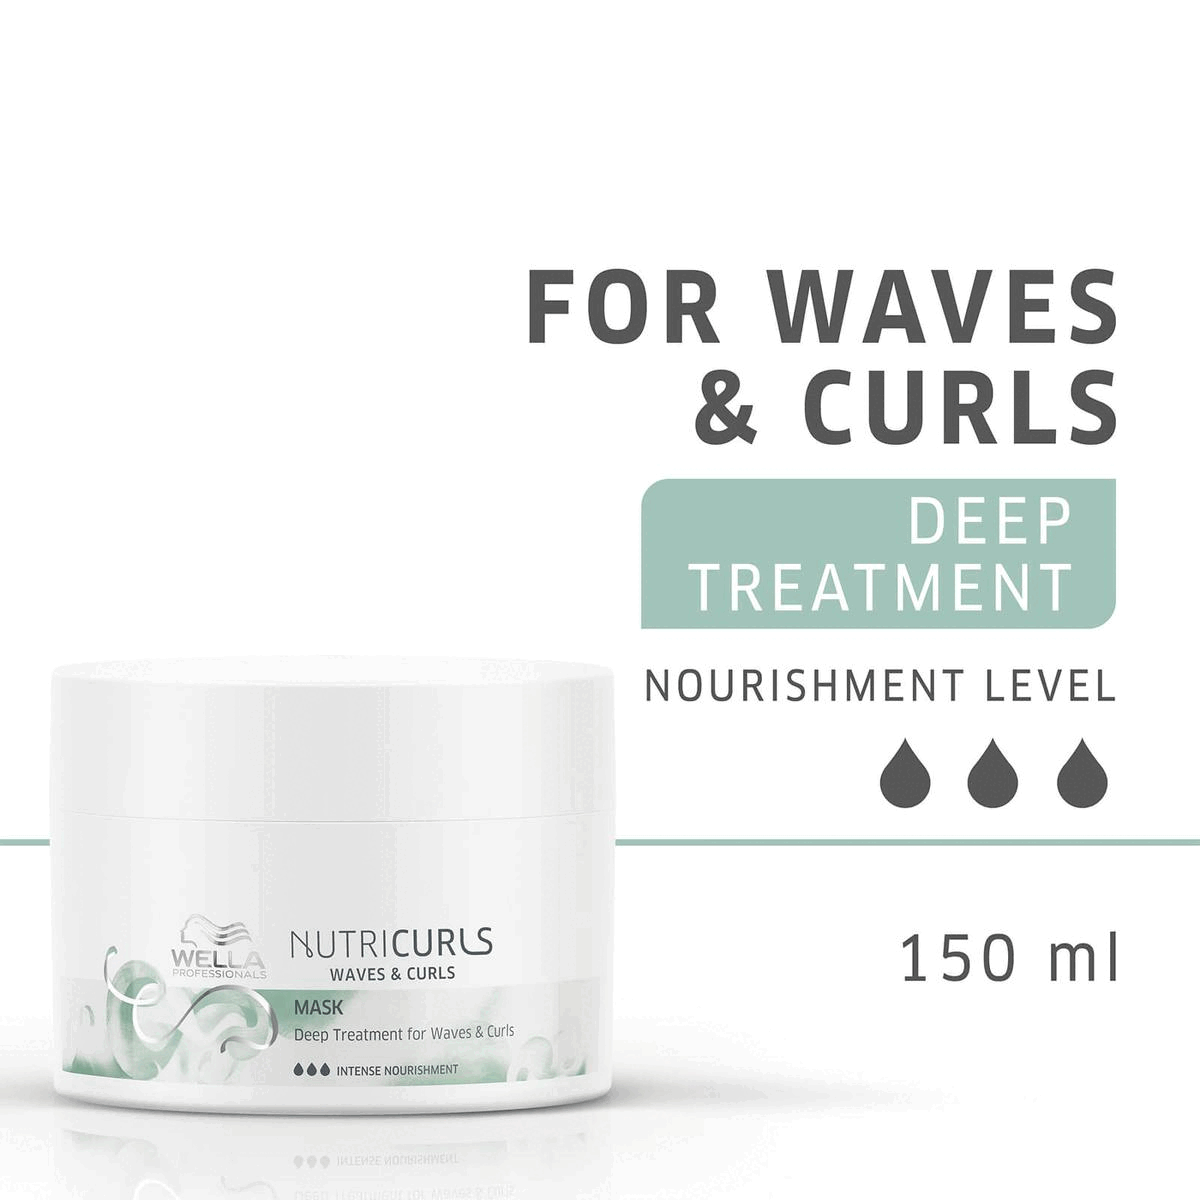 For waves & curves deep treatement , noruishment level - intense.Intense Nourishing Treatment, that helps to prevent fizz.Intense Nourishment Level.Nourish-In Complex.Energizing Fragrance.Find the Perfect Partner.Nutricurls - Care & Styling Range*